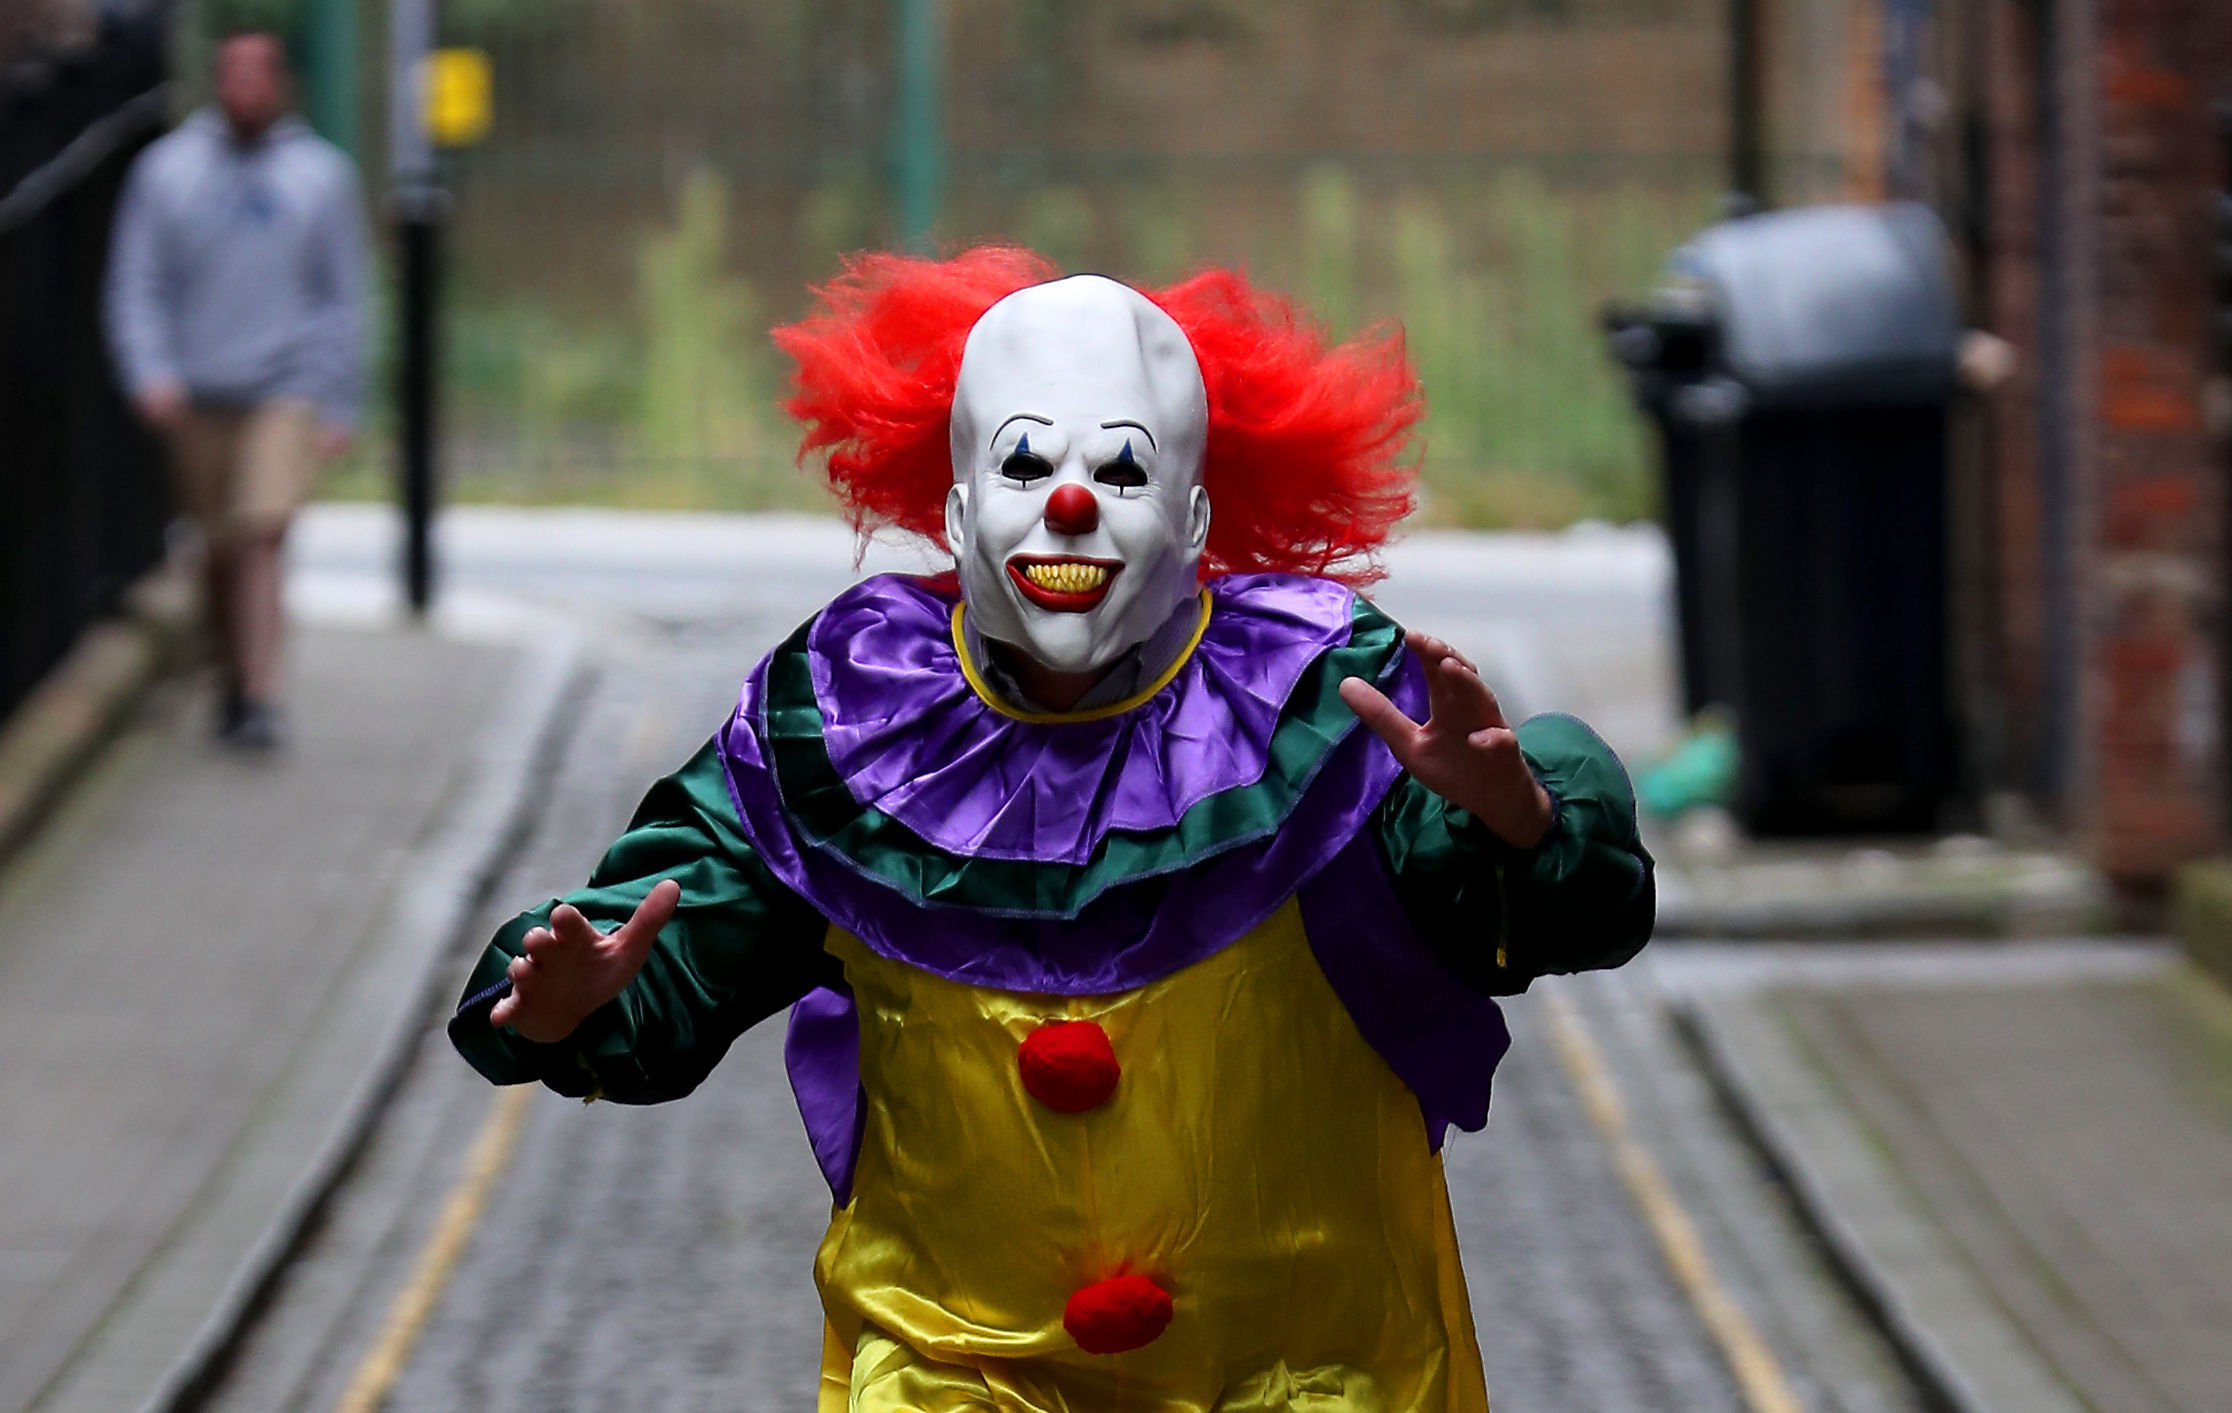 Clowns like these have allegedly been spotted across the UK